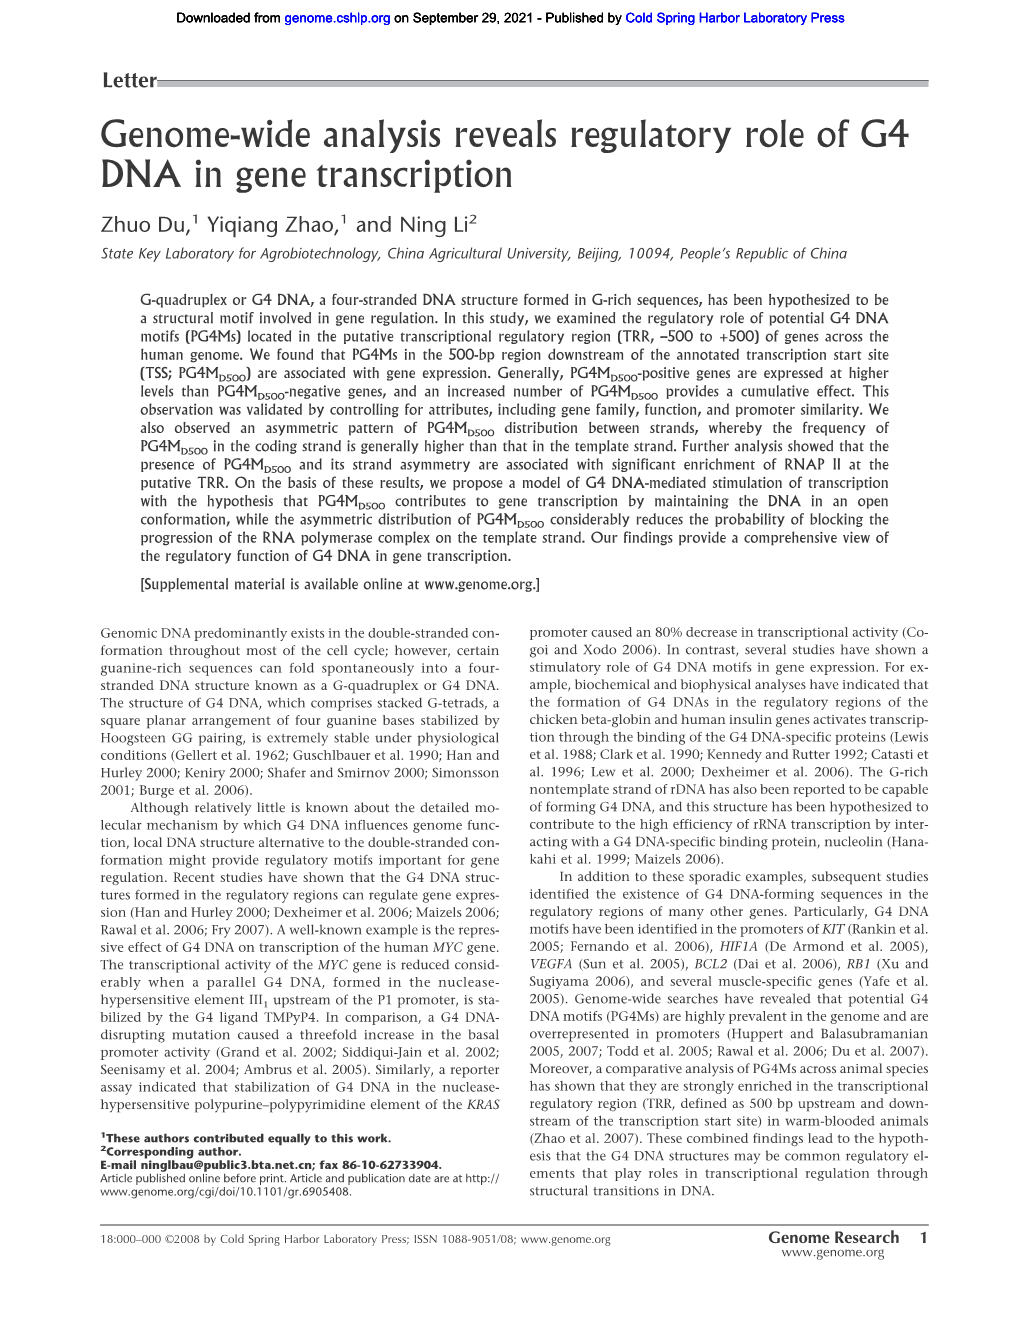 Genome-Wide Analysis Reveals Regulatory Role of G4 DNA in Gene Transcription